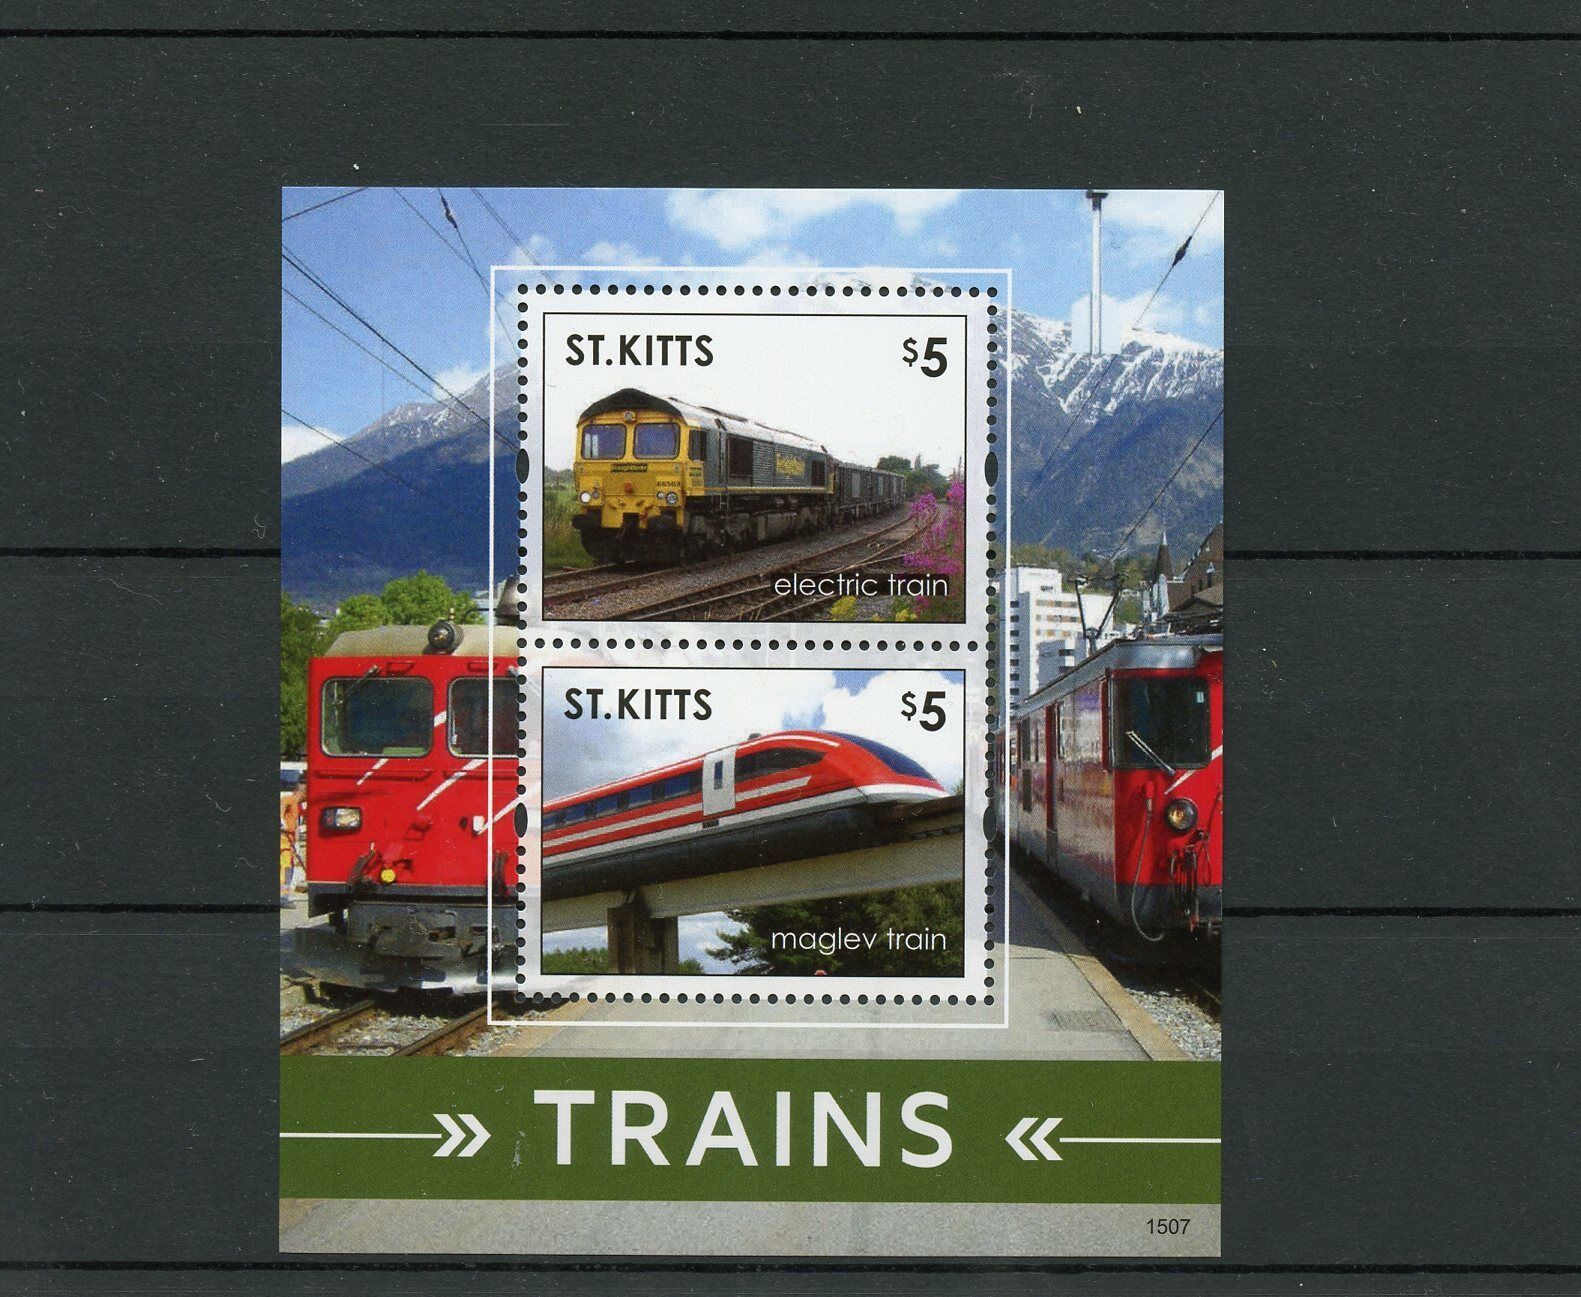 St Kitts 2015 MNH Trains Electric Train Maglev 2v S/S Railways Rail Stamps